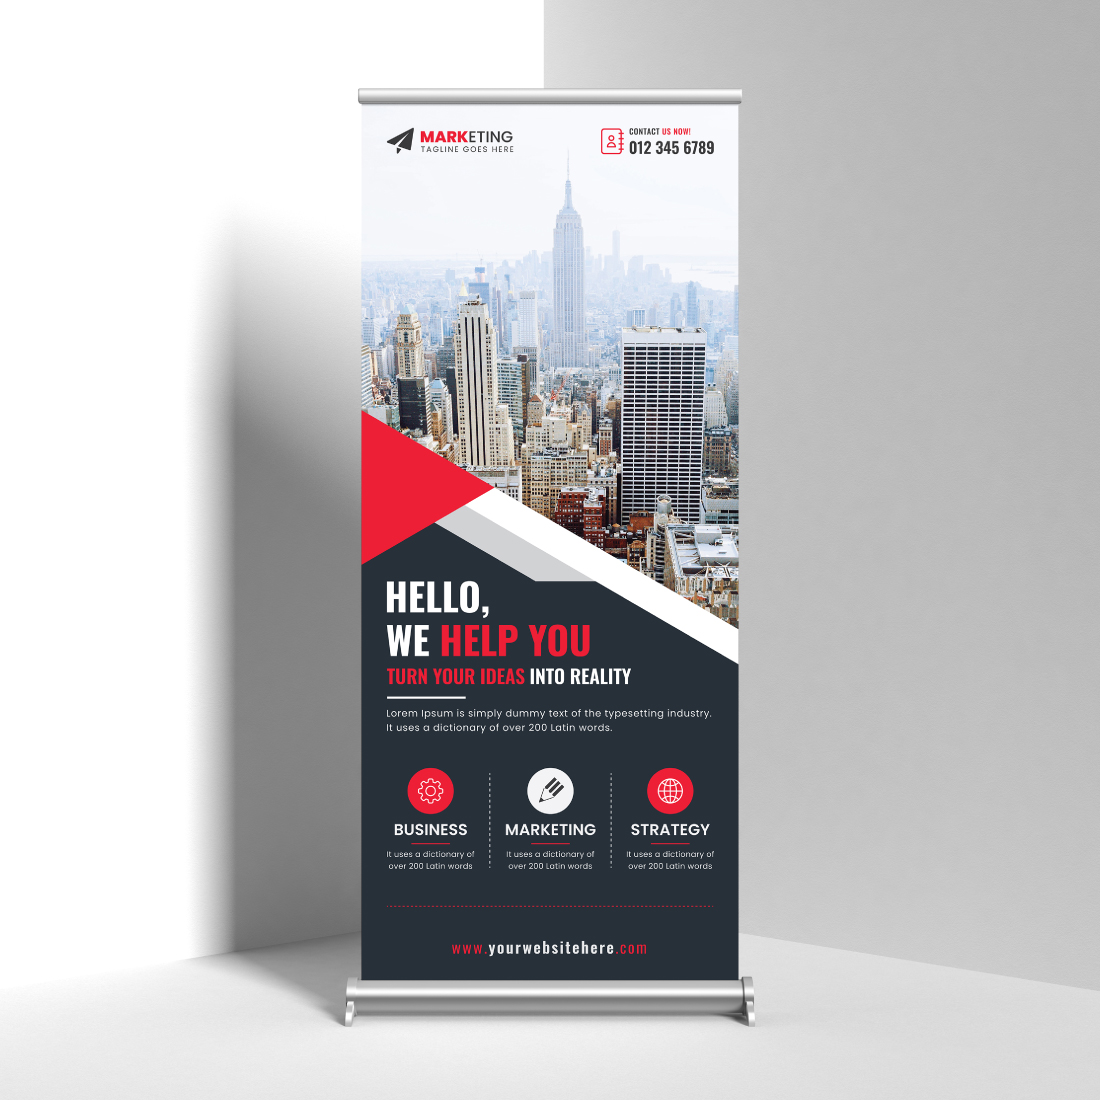 Image of corporate roll up banner in wonderful red design